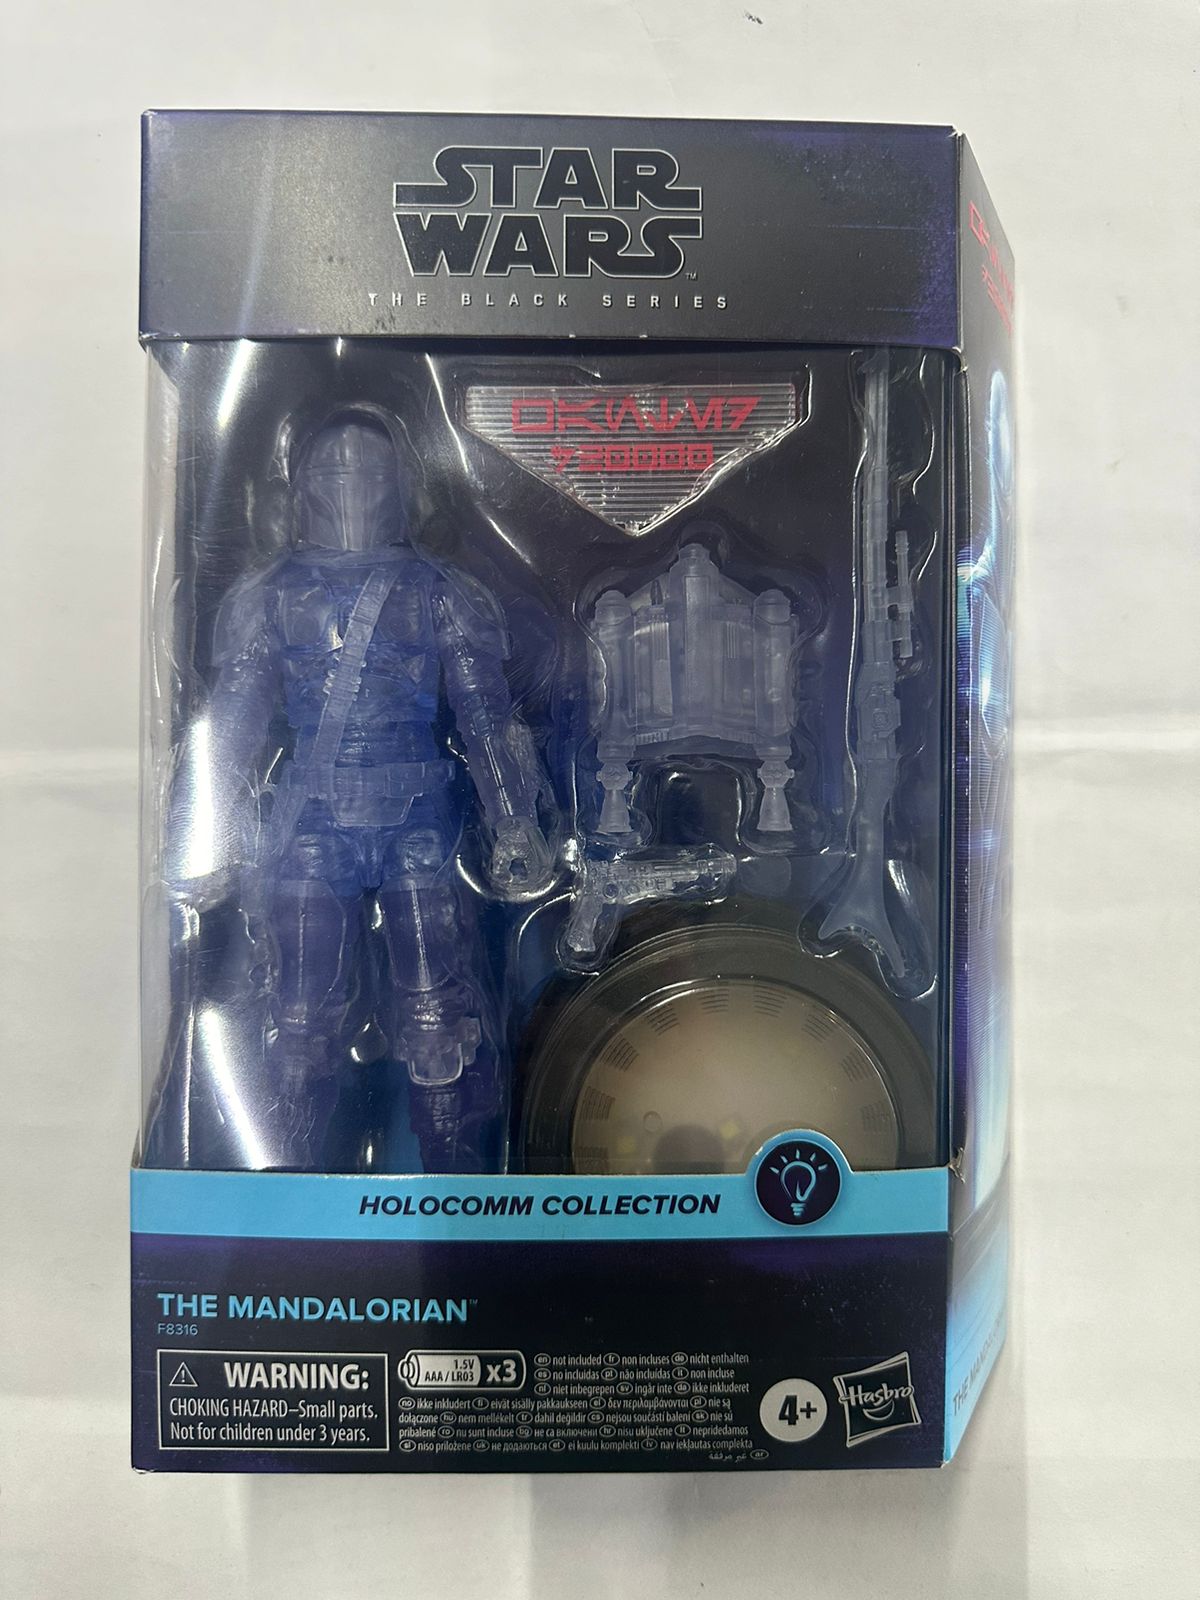 The mandalorian (HOLOCOMM COLLECTION)